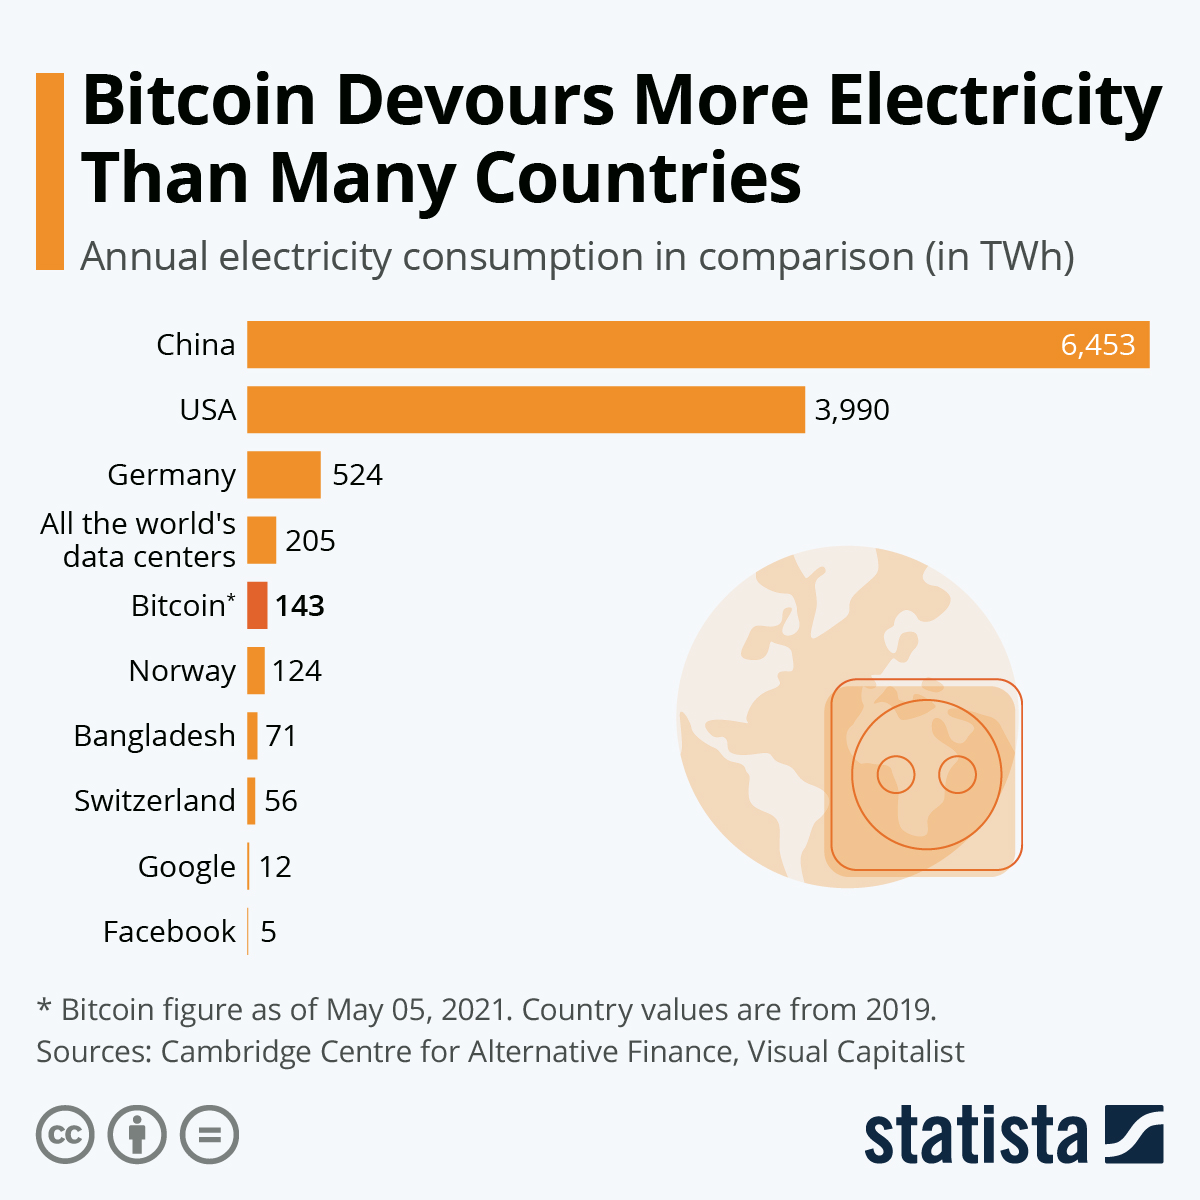 Bitcoin devours almost 3x more electricity than Switzerland